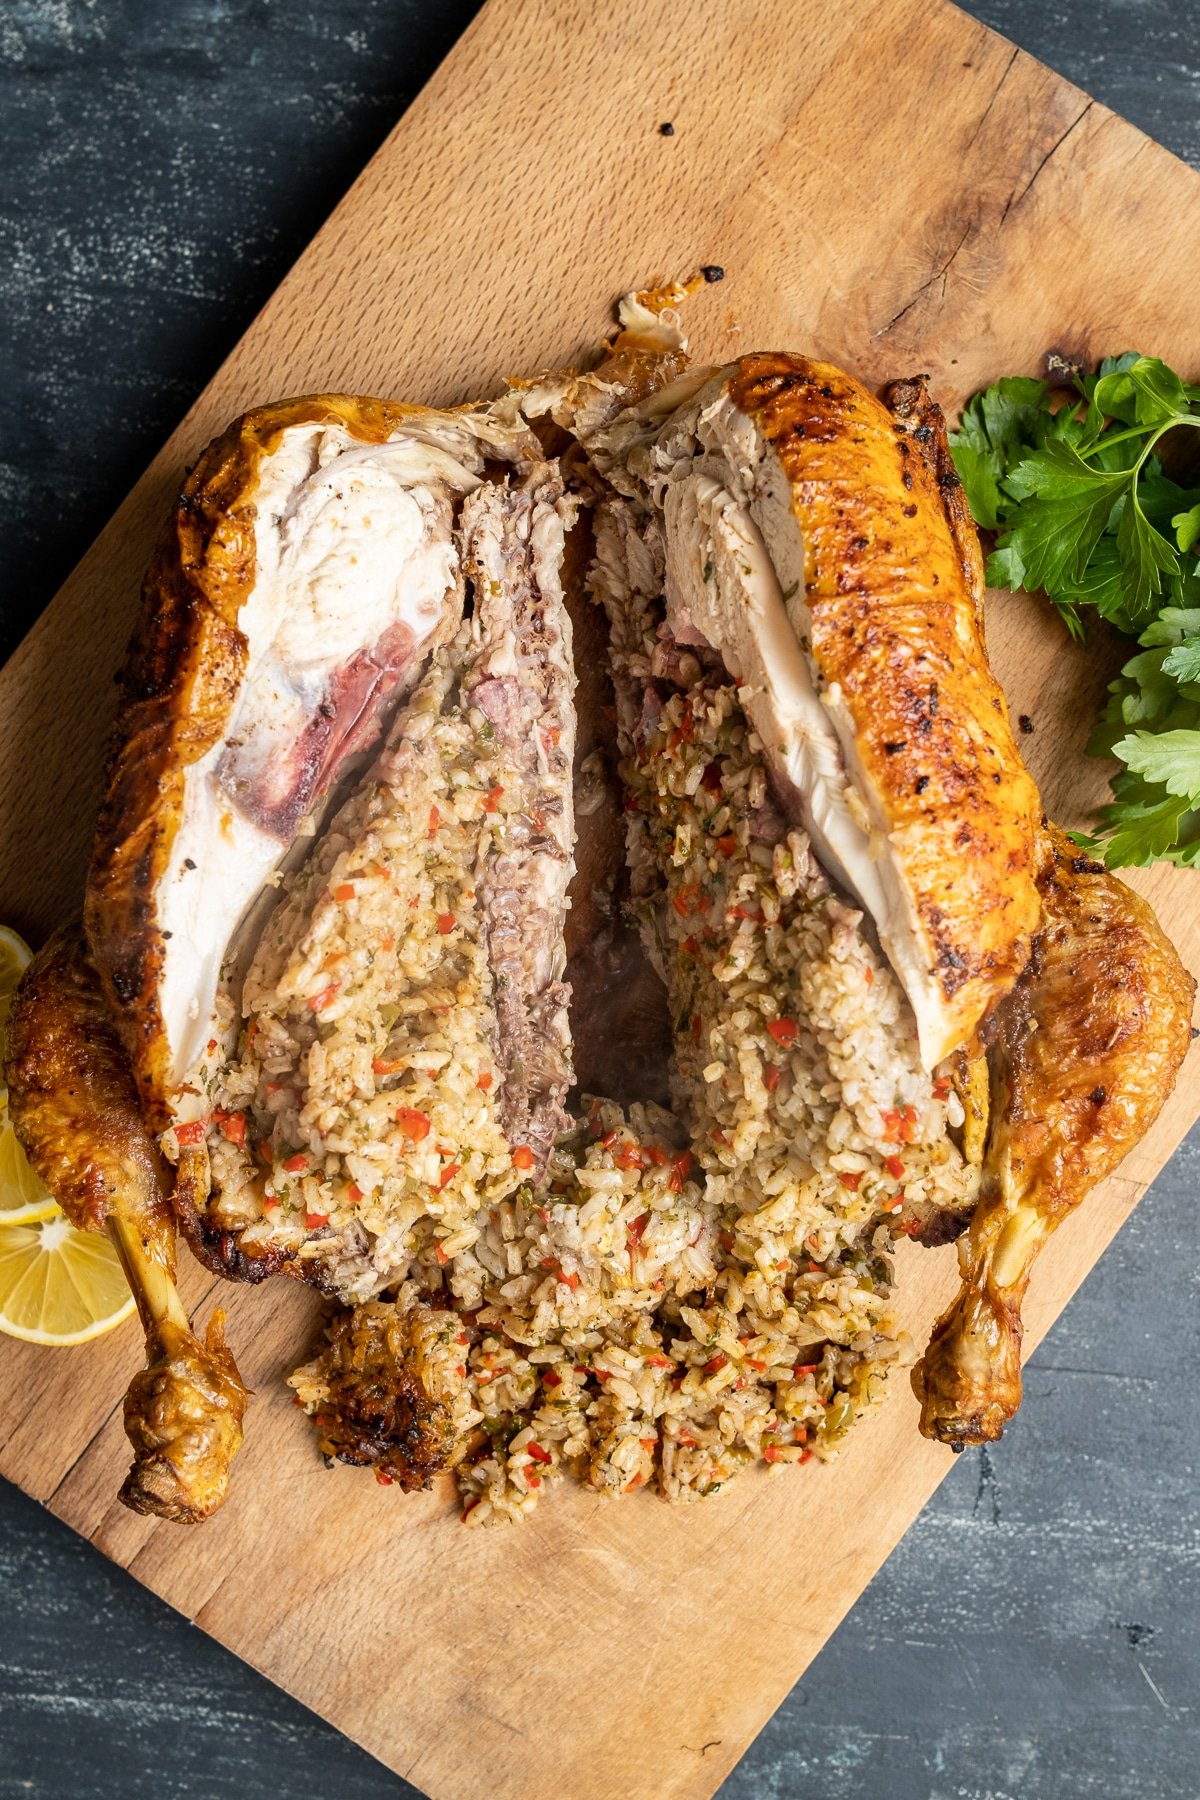 Roasted rice stuffed whole chicken is cut in the middle on a wooden board.